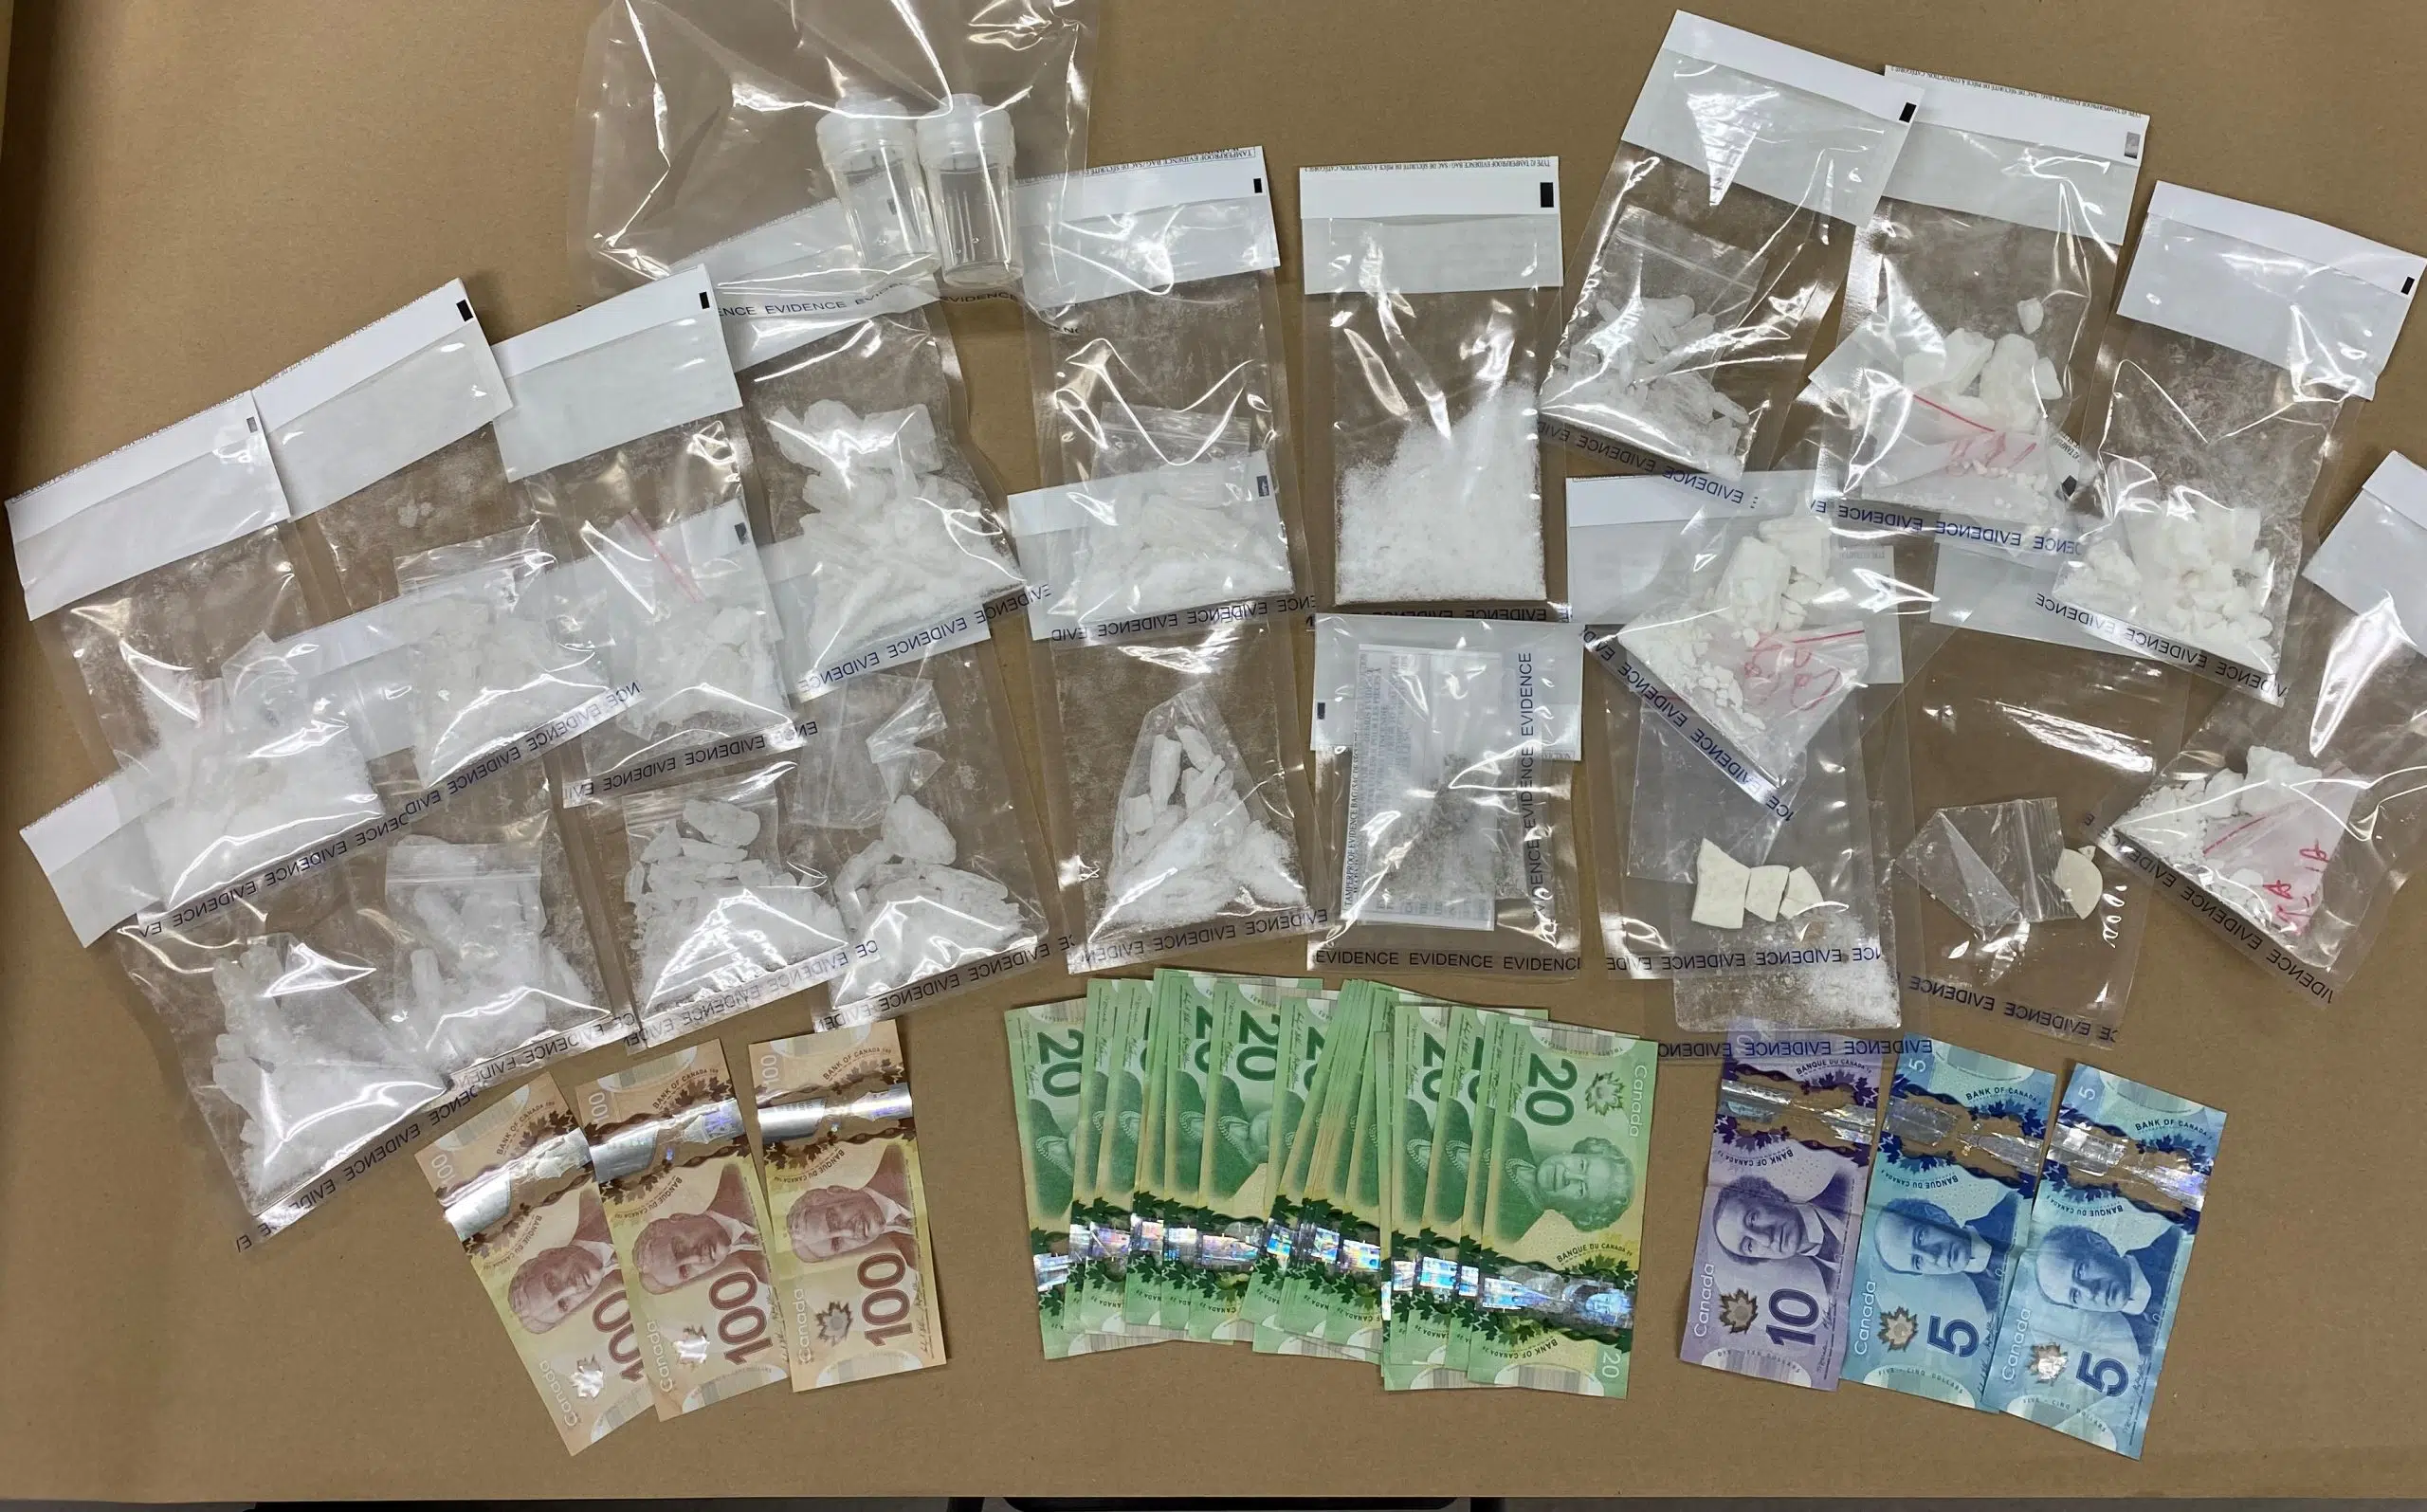 Blackfalds RCMP Execute Search Warrant And Seize Drugs